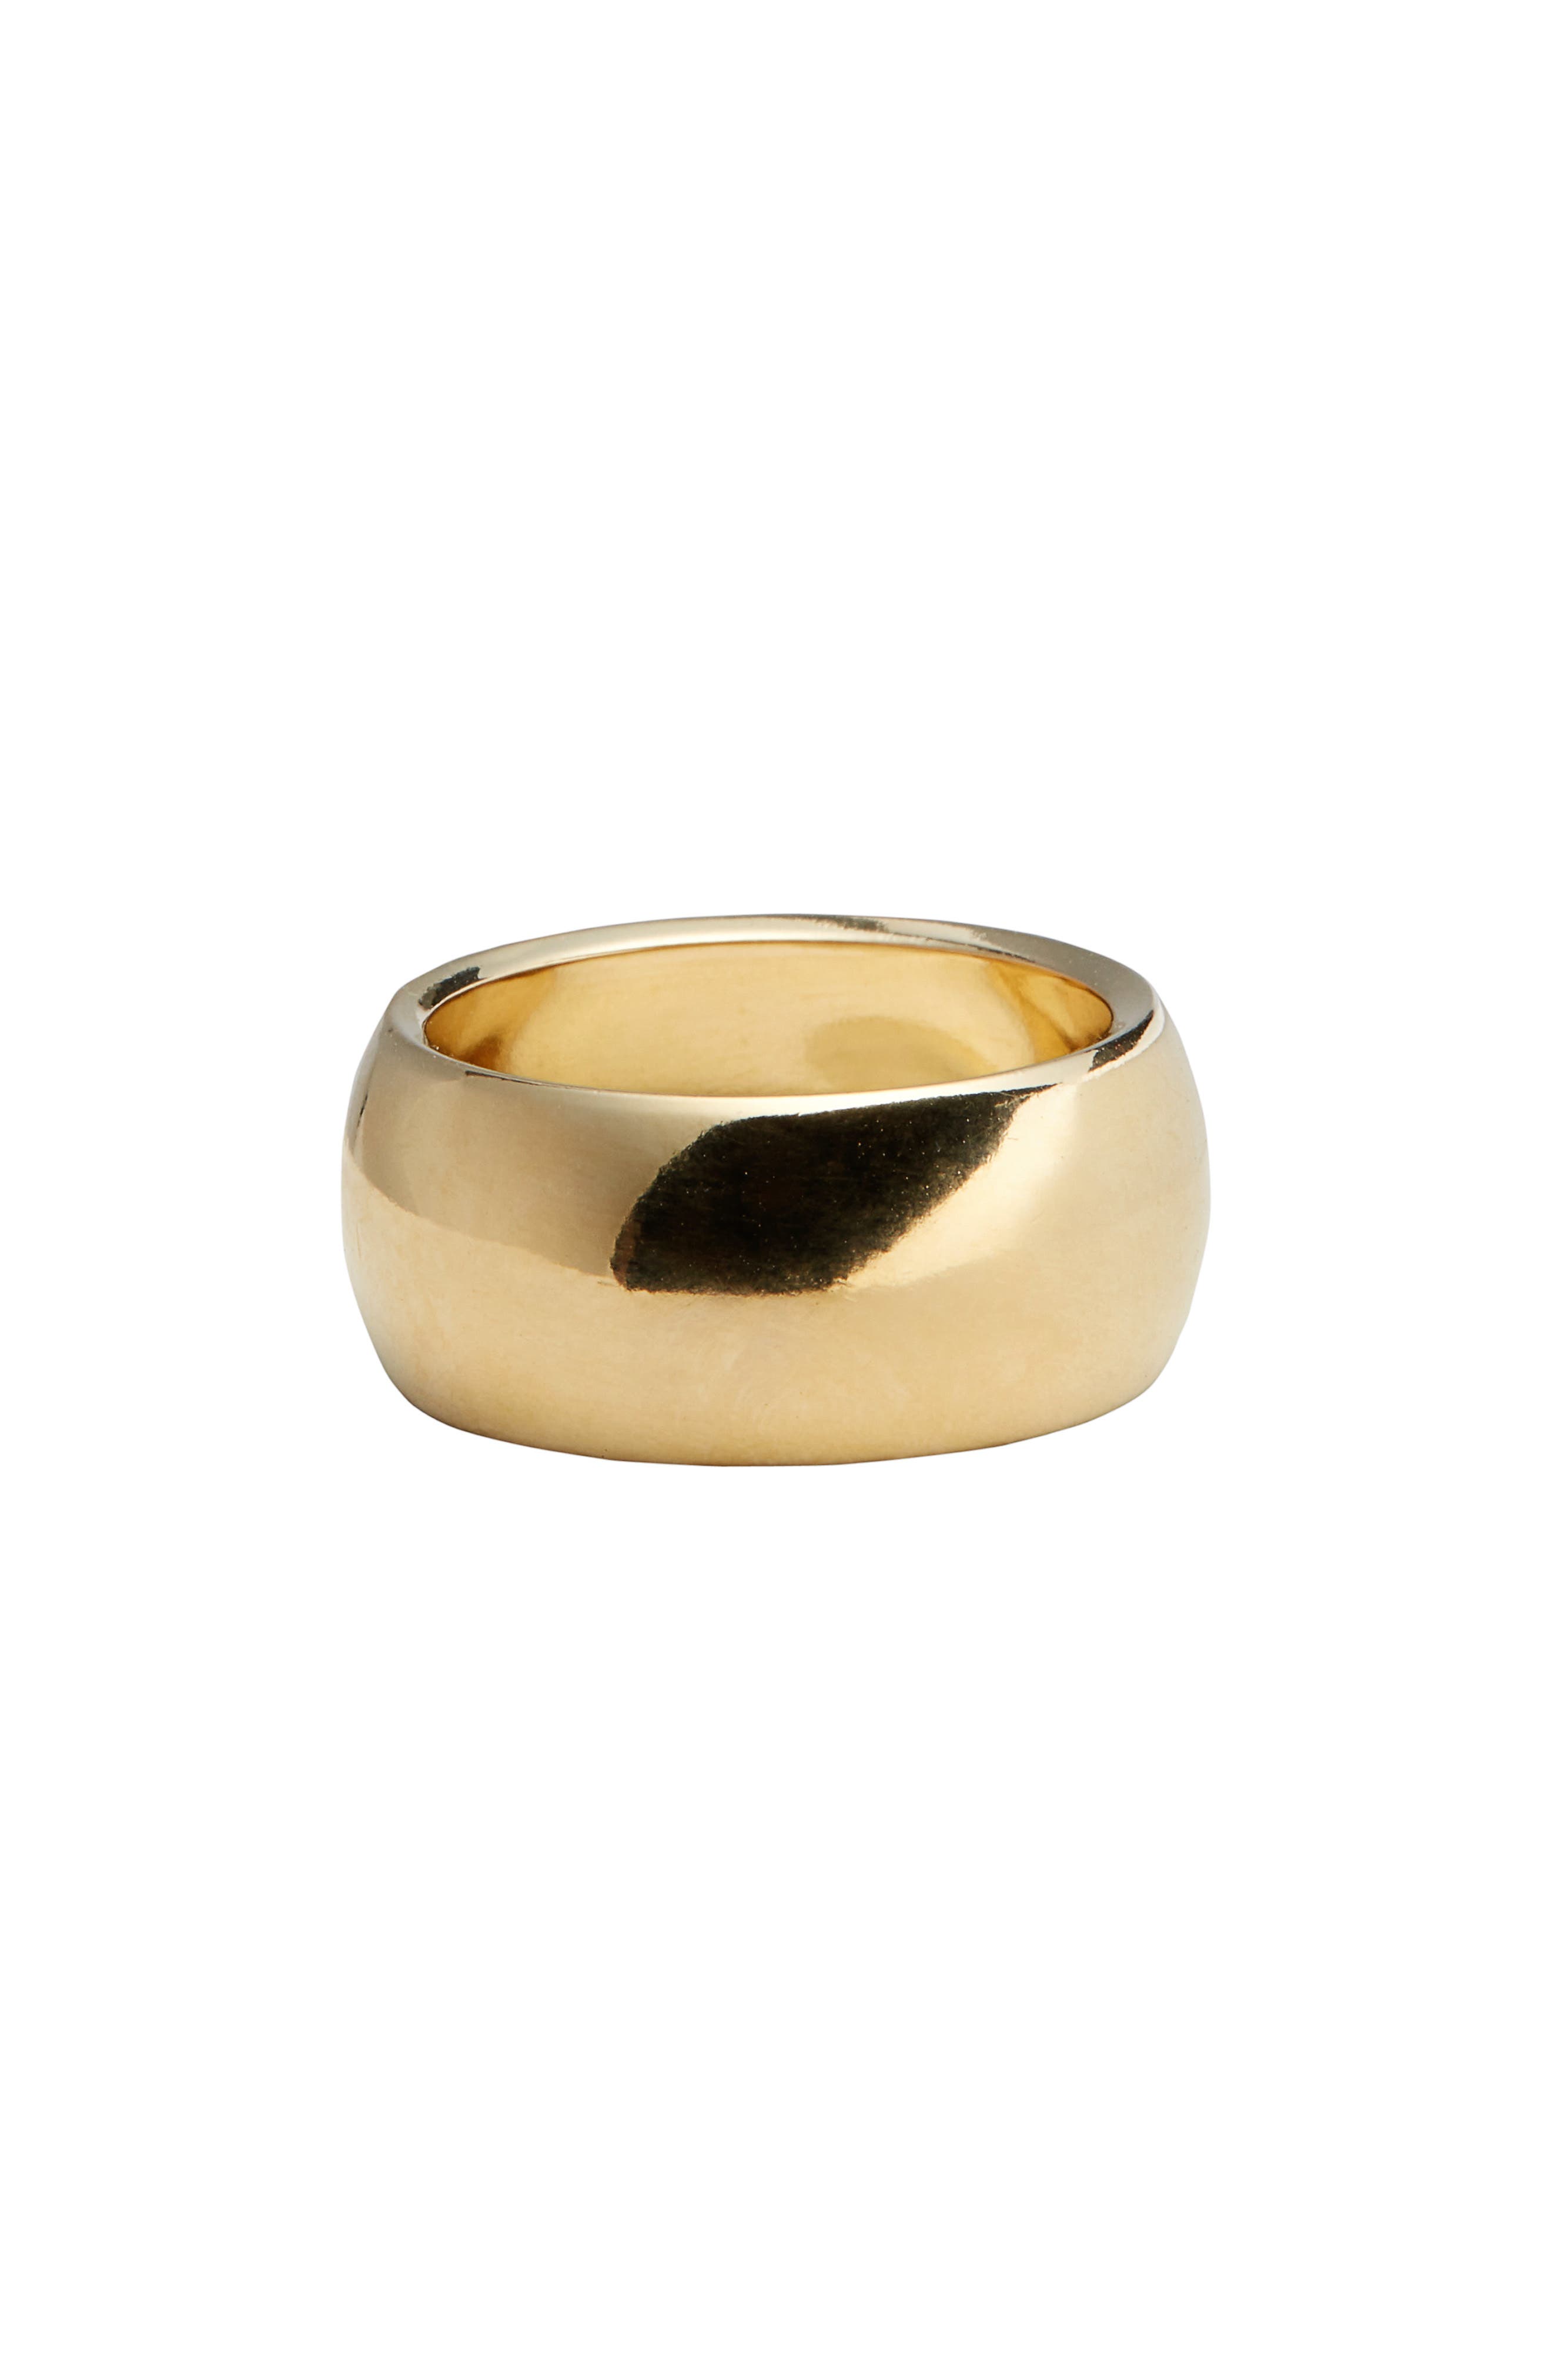 Laura Lombardi Luna Ring in Brass at Nordstrom, Size 7 Us